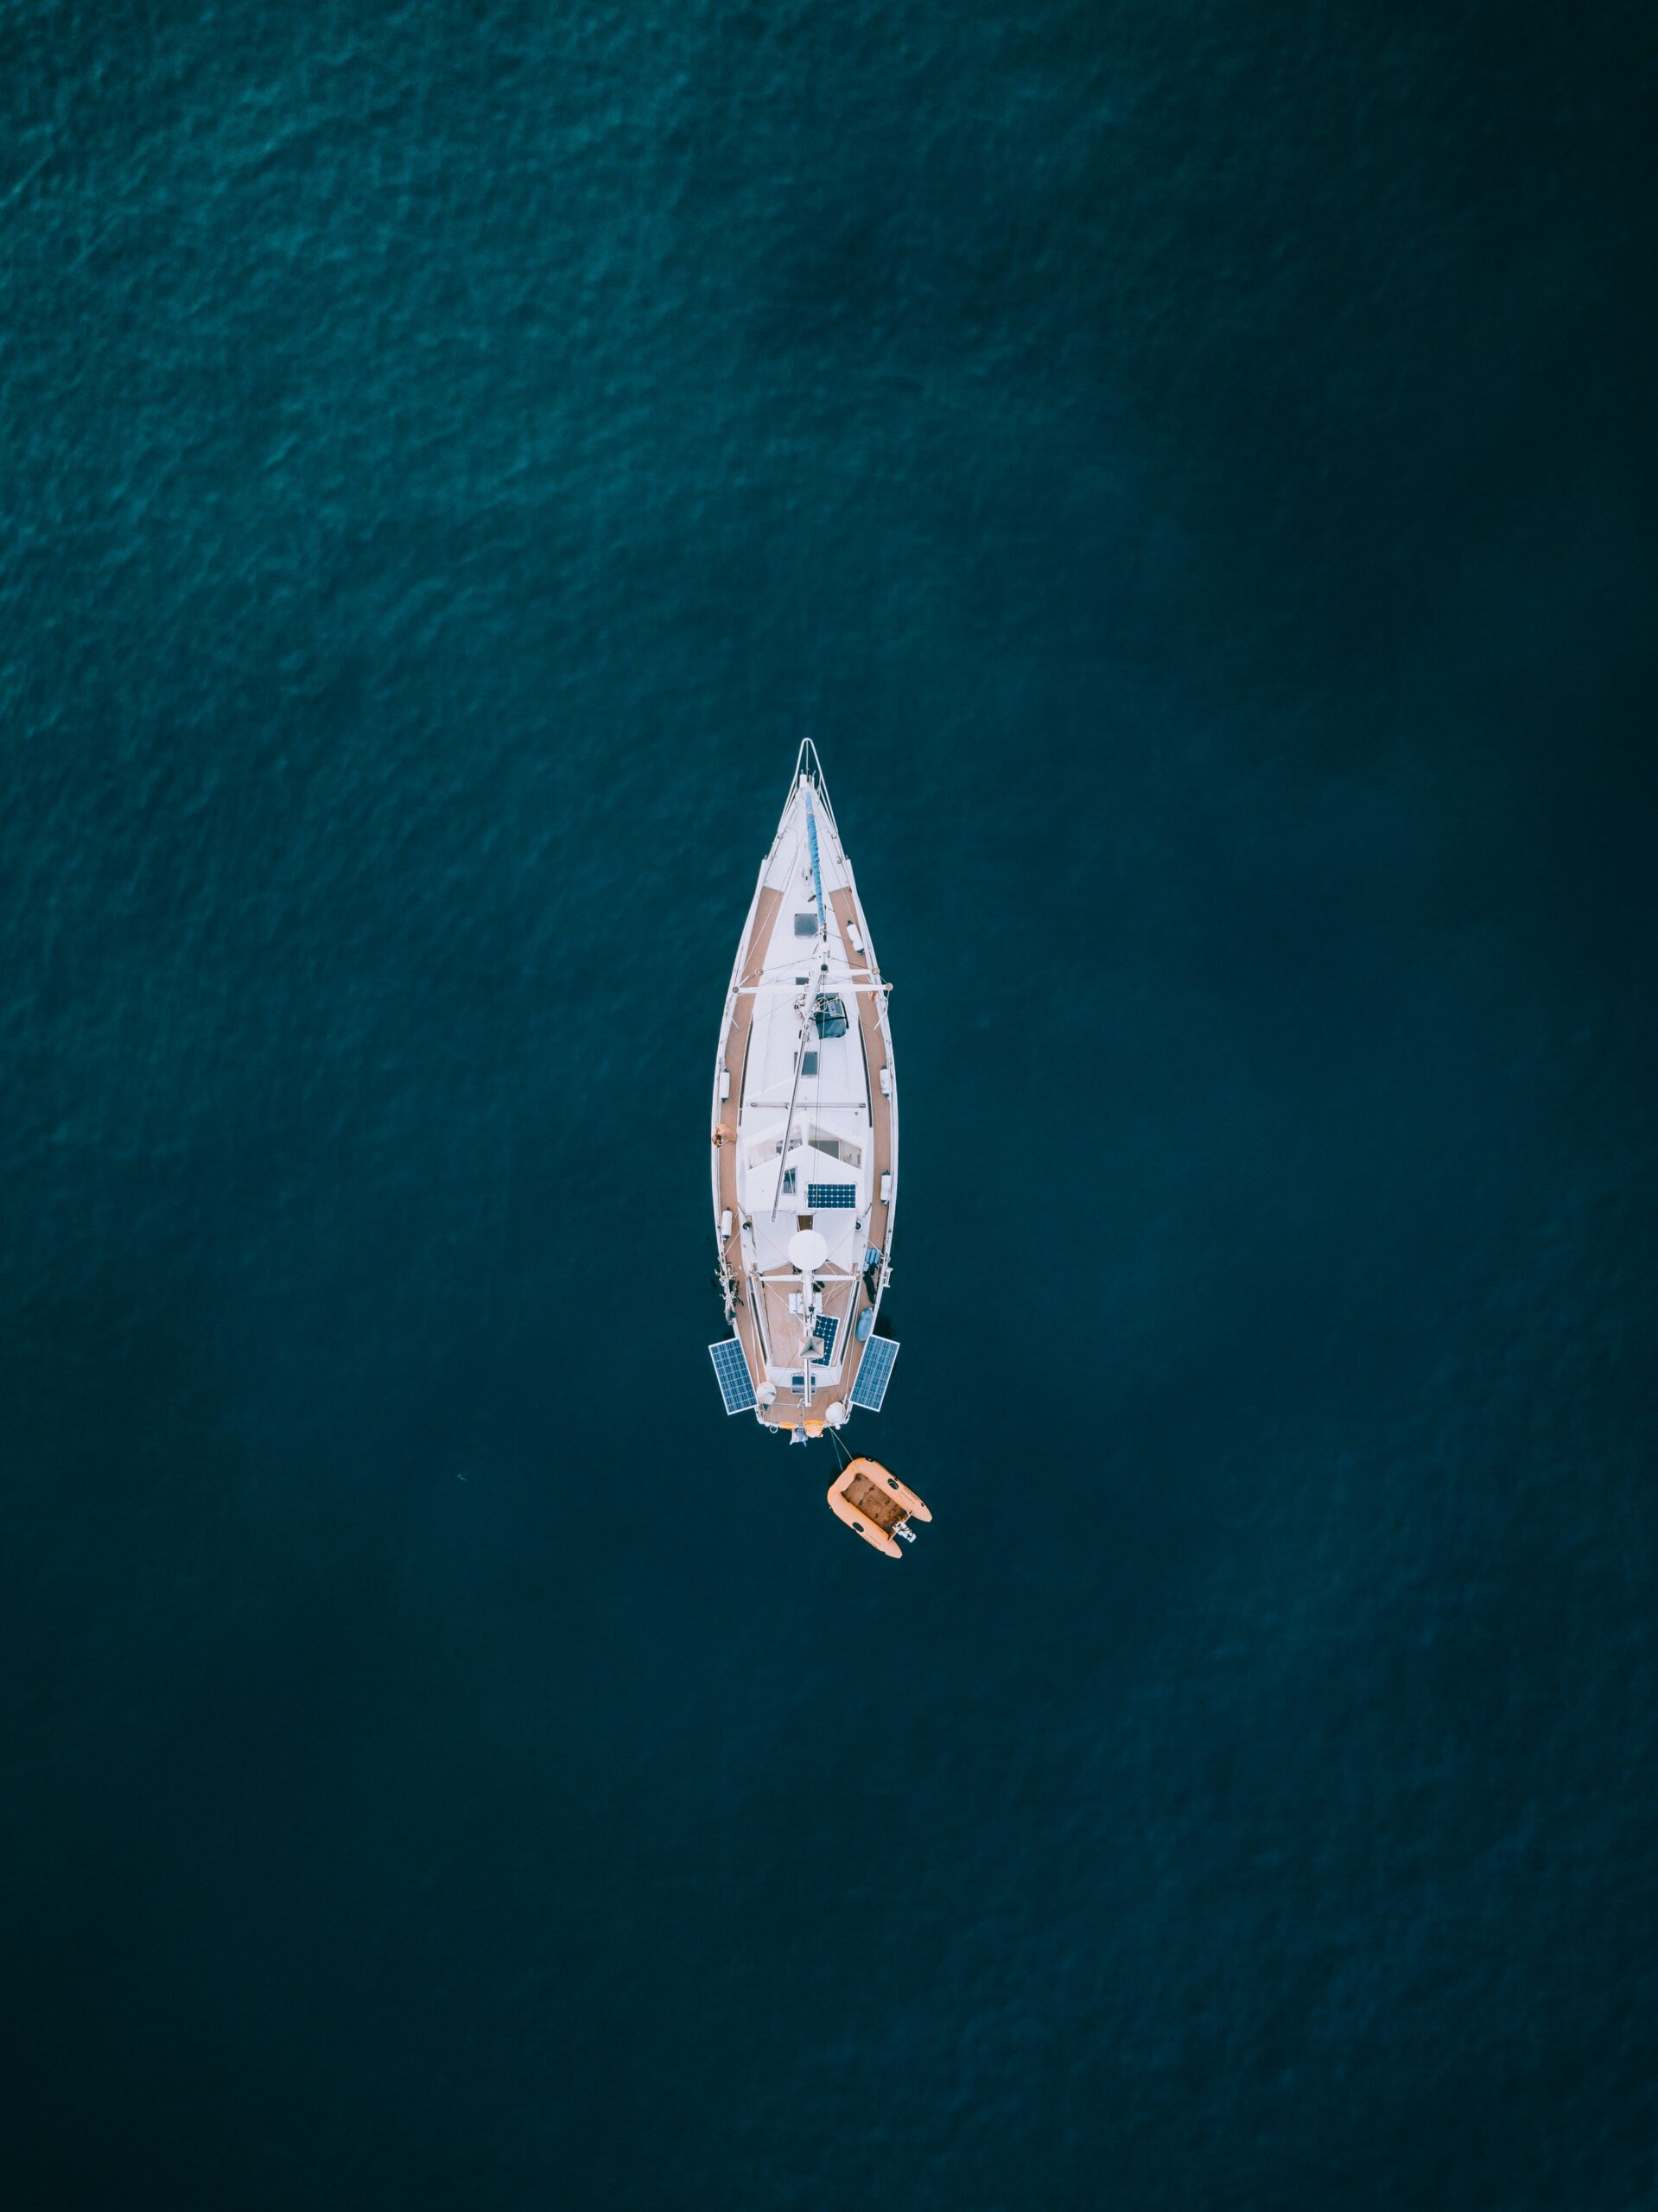 Aerial-photography-of-white-and-brown-boat-on-body-of-water